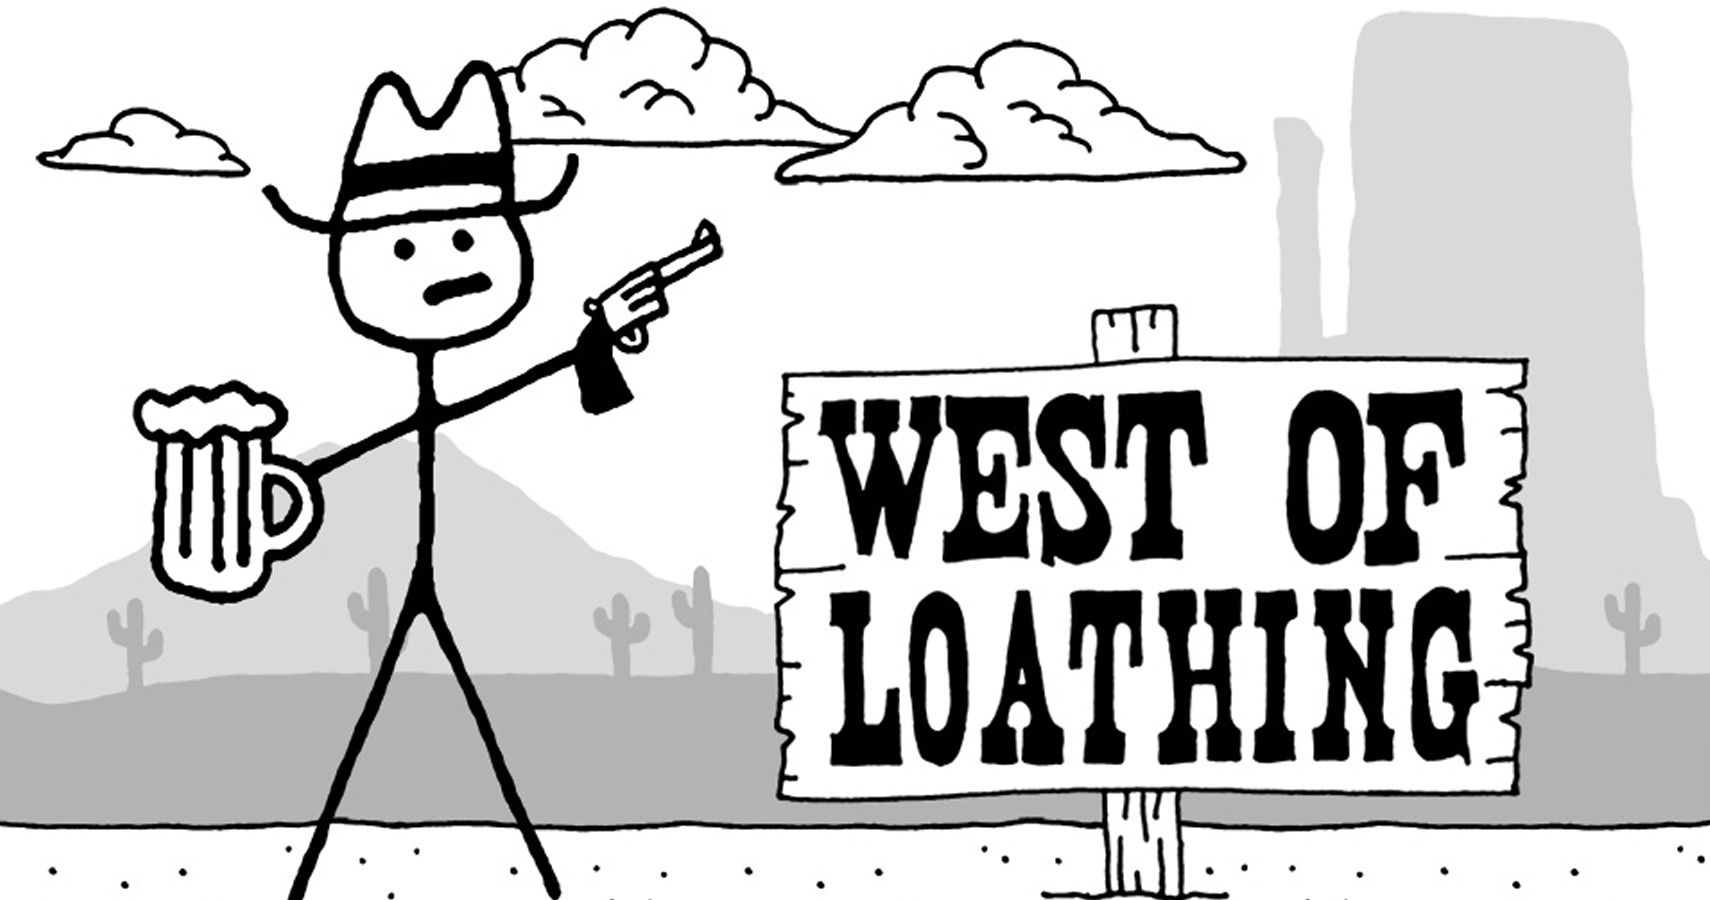 west of loathing switch price